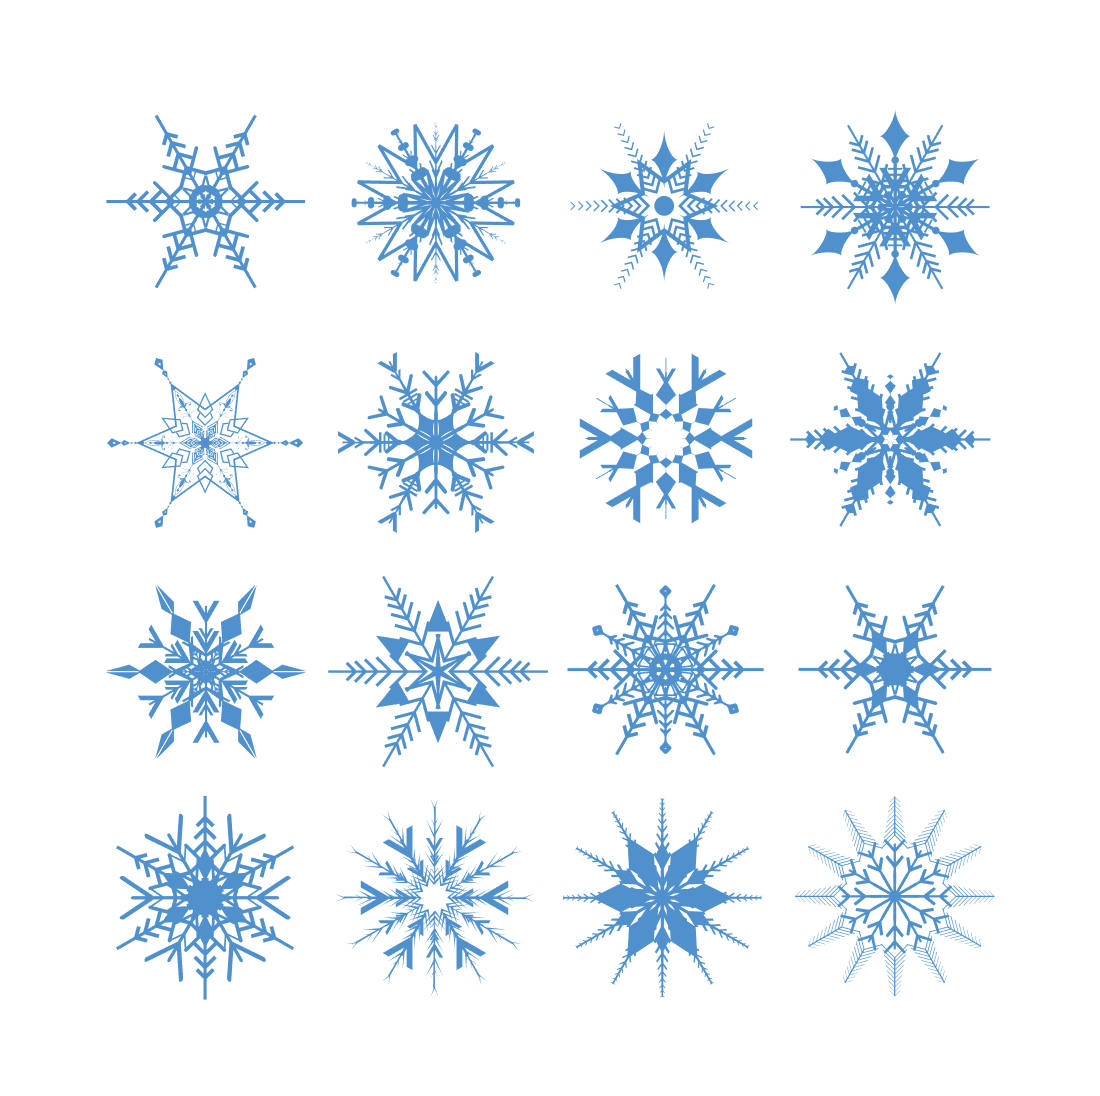 Diverse of snowflakes on the light background.